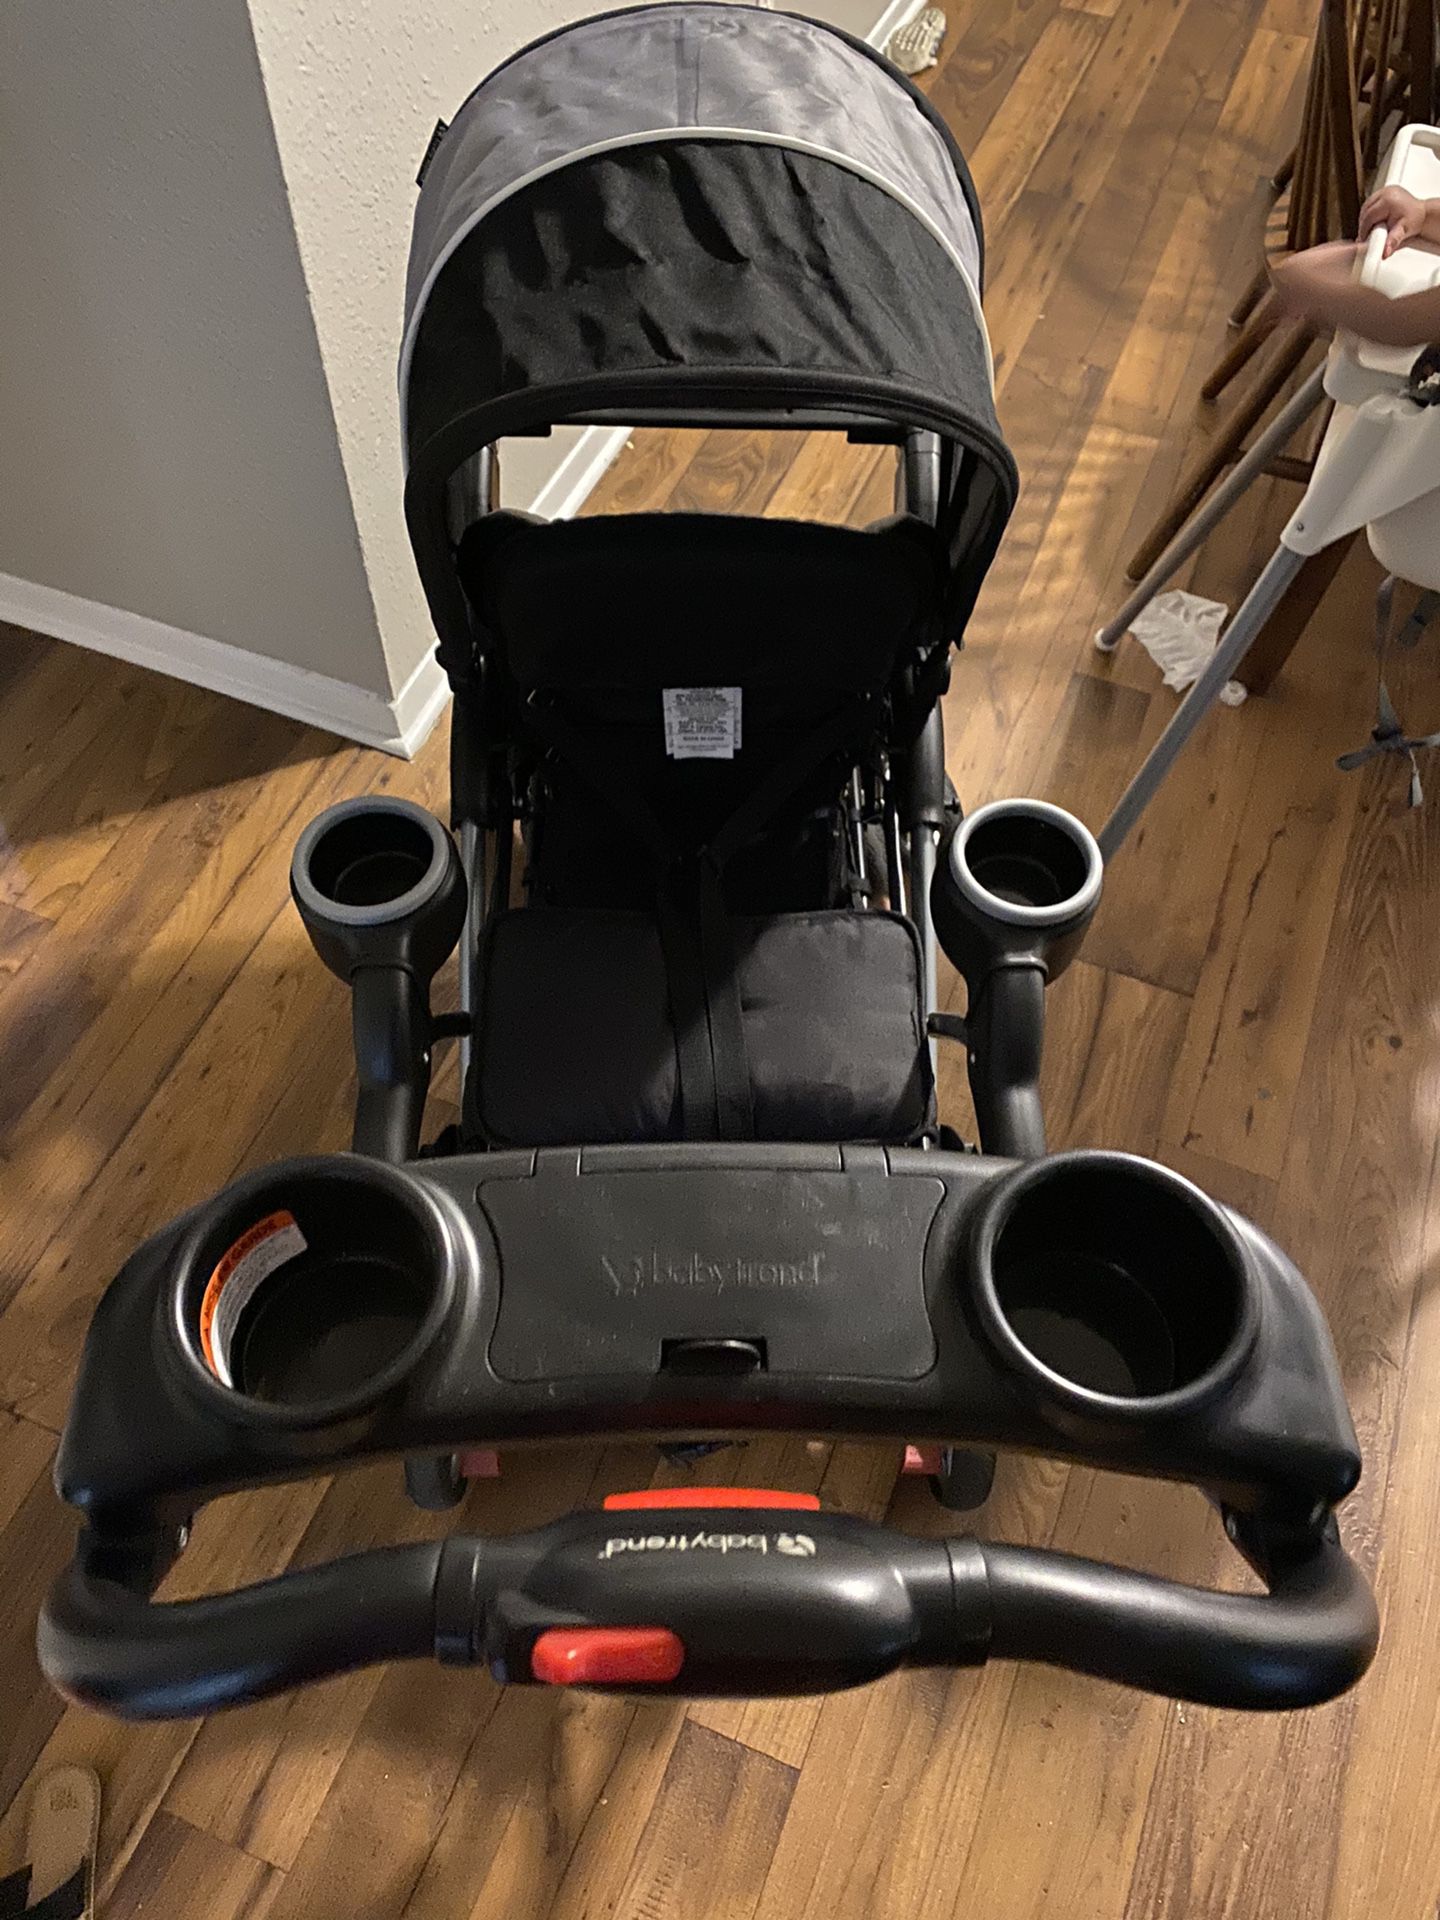 Sit N Stand double stroller